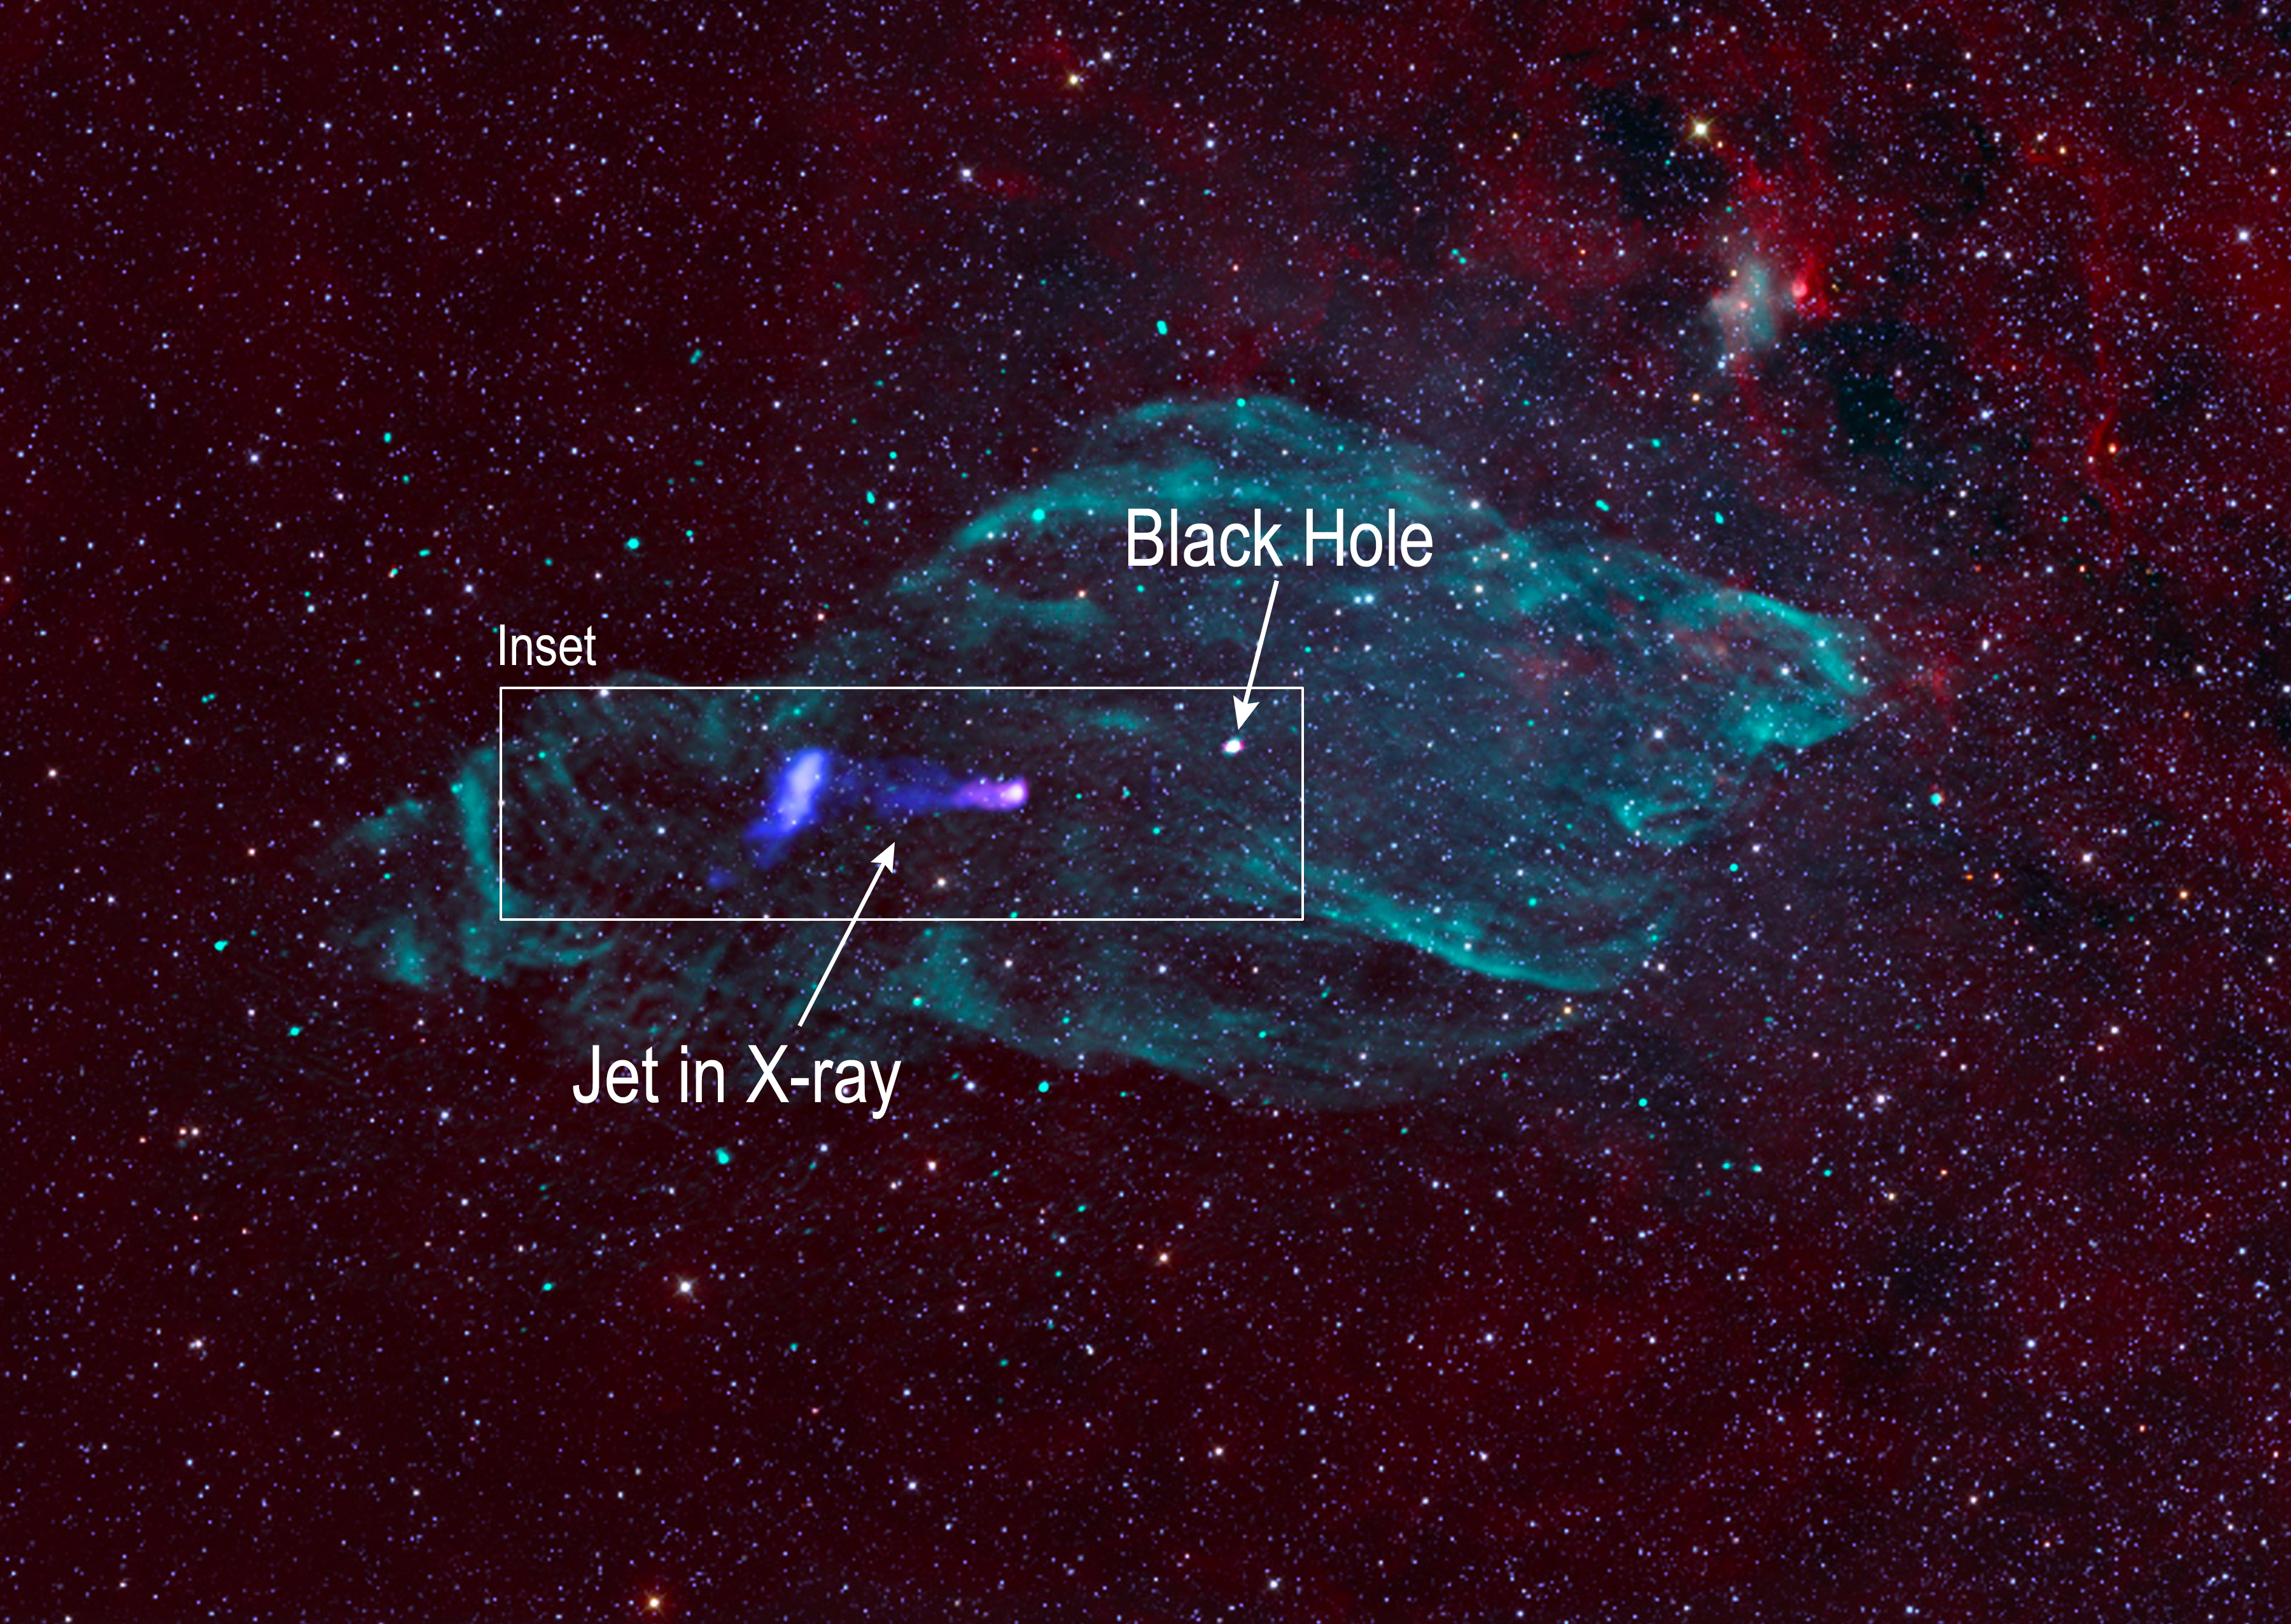 A black/red background filled with stars has a green oval in the center with a blue/ purple jet stream in it.It has text labels showing the Black Hole and Het in X-Ray